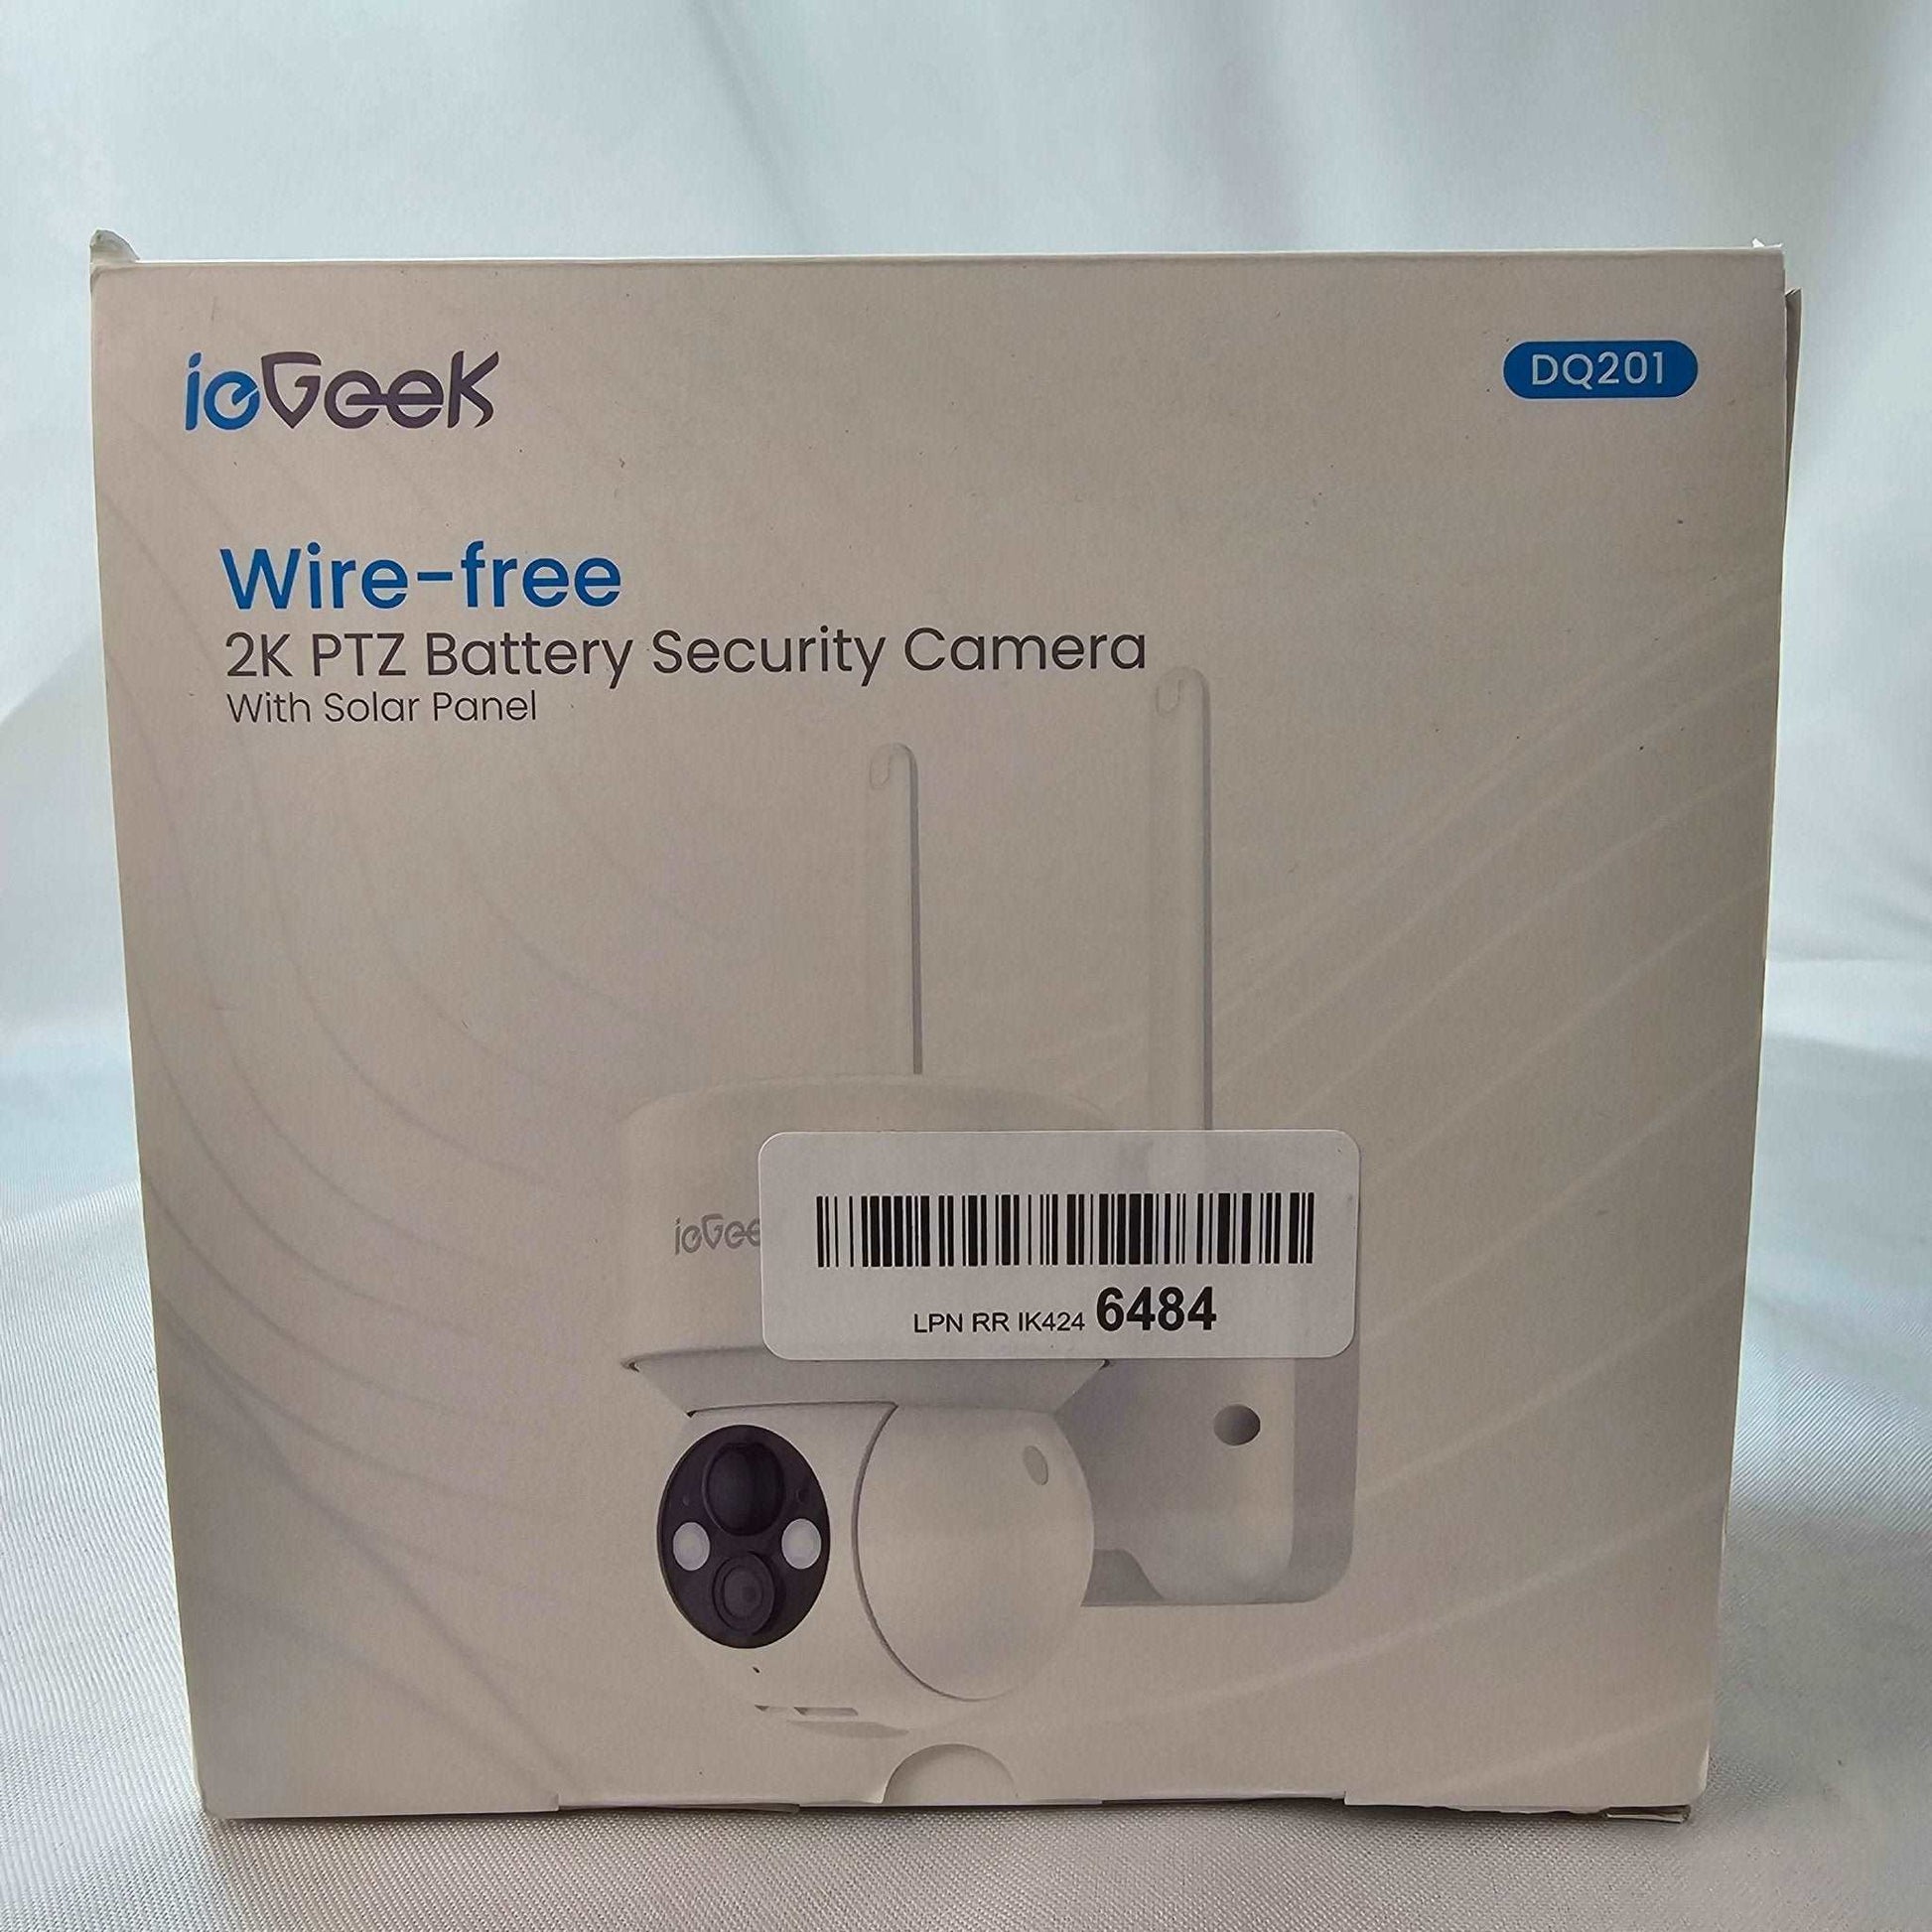 Battery Security Camera 2K PTZ Wire Free ieGeek DQ201 - DQ Distribution